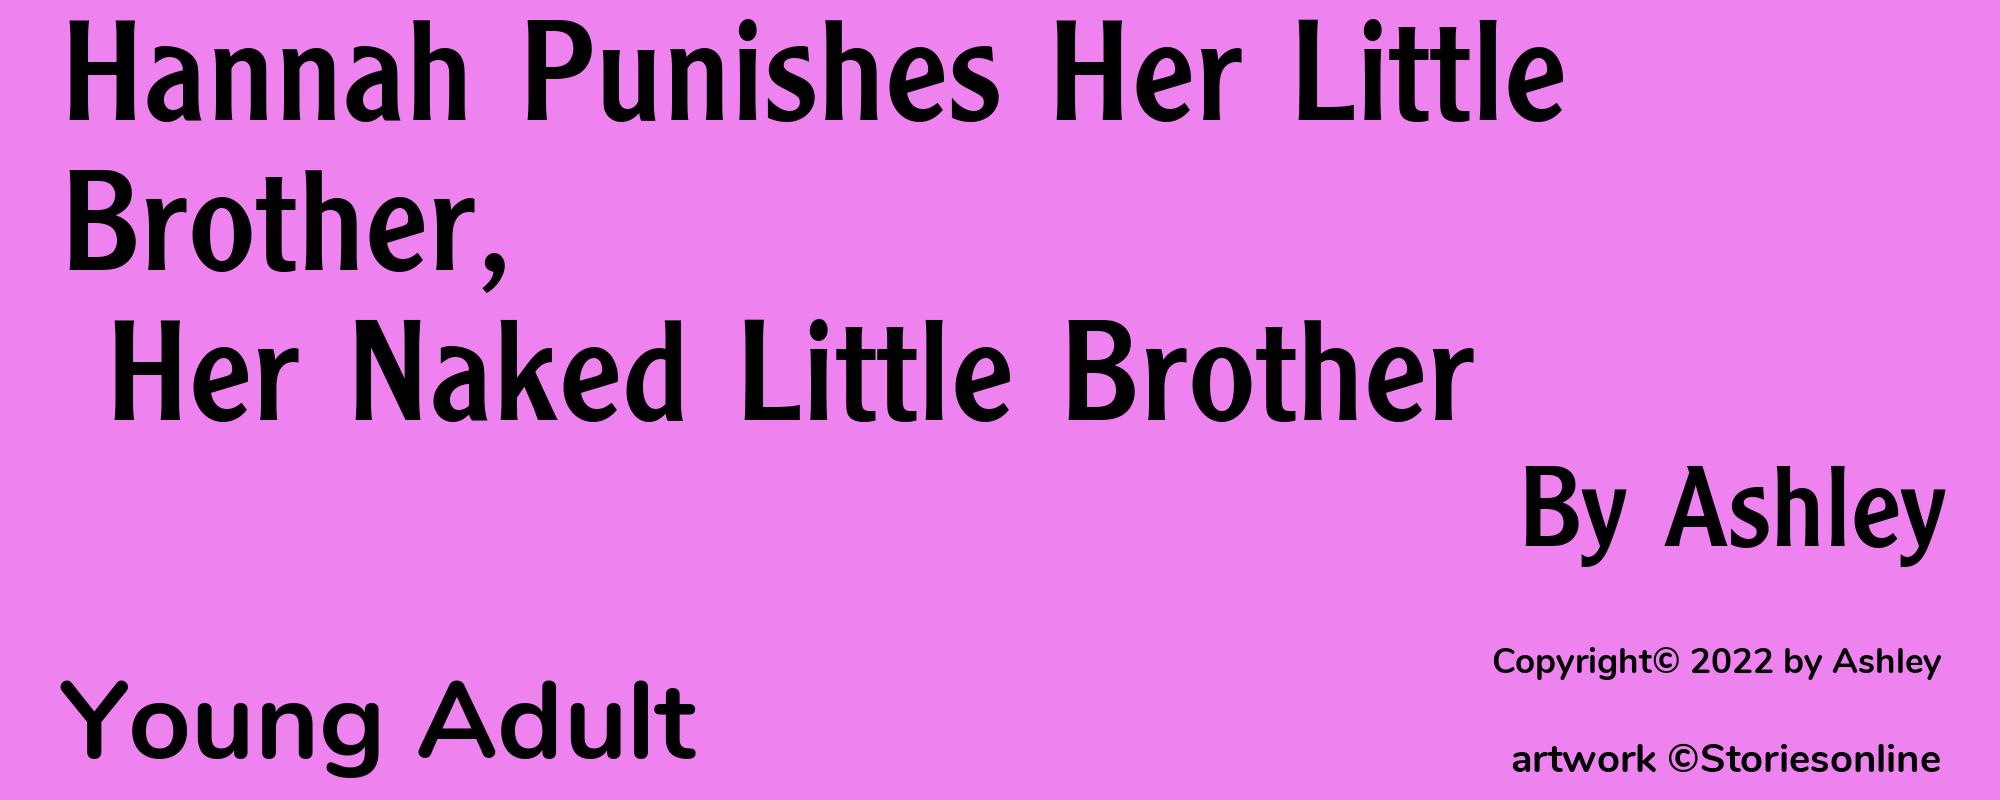 Hannah Punishes Her Little Brother, Her Naked Little Brother - Cover